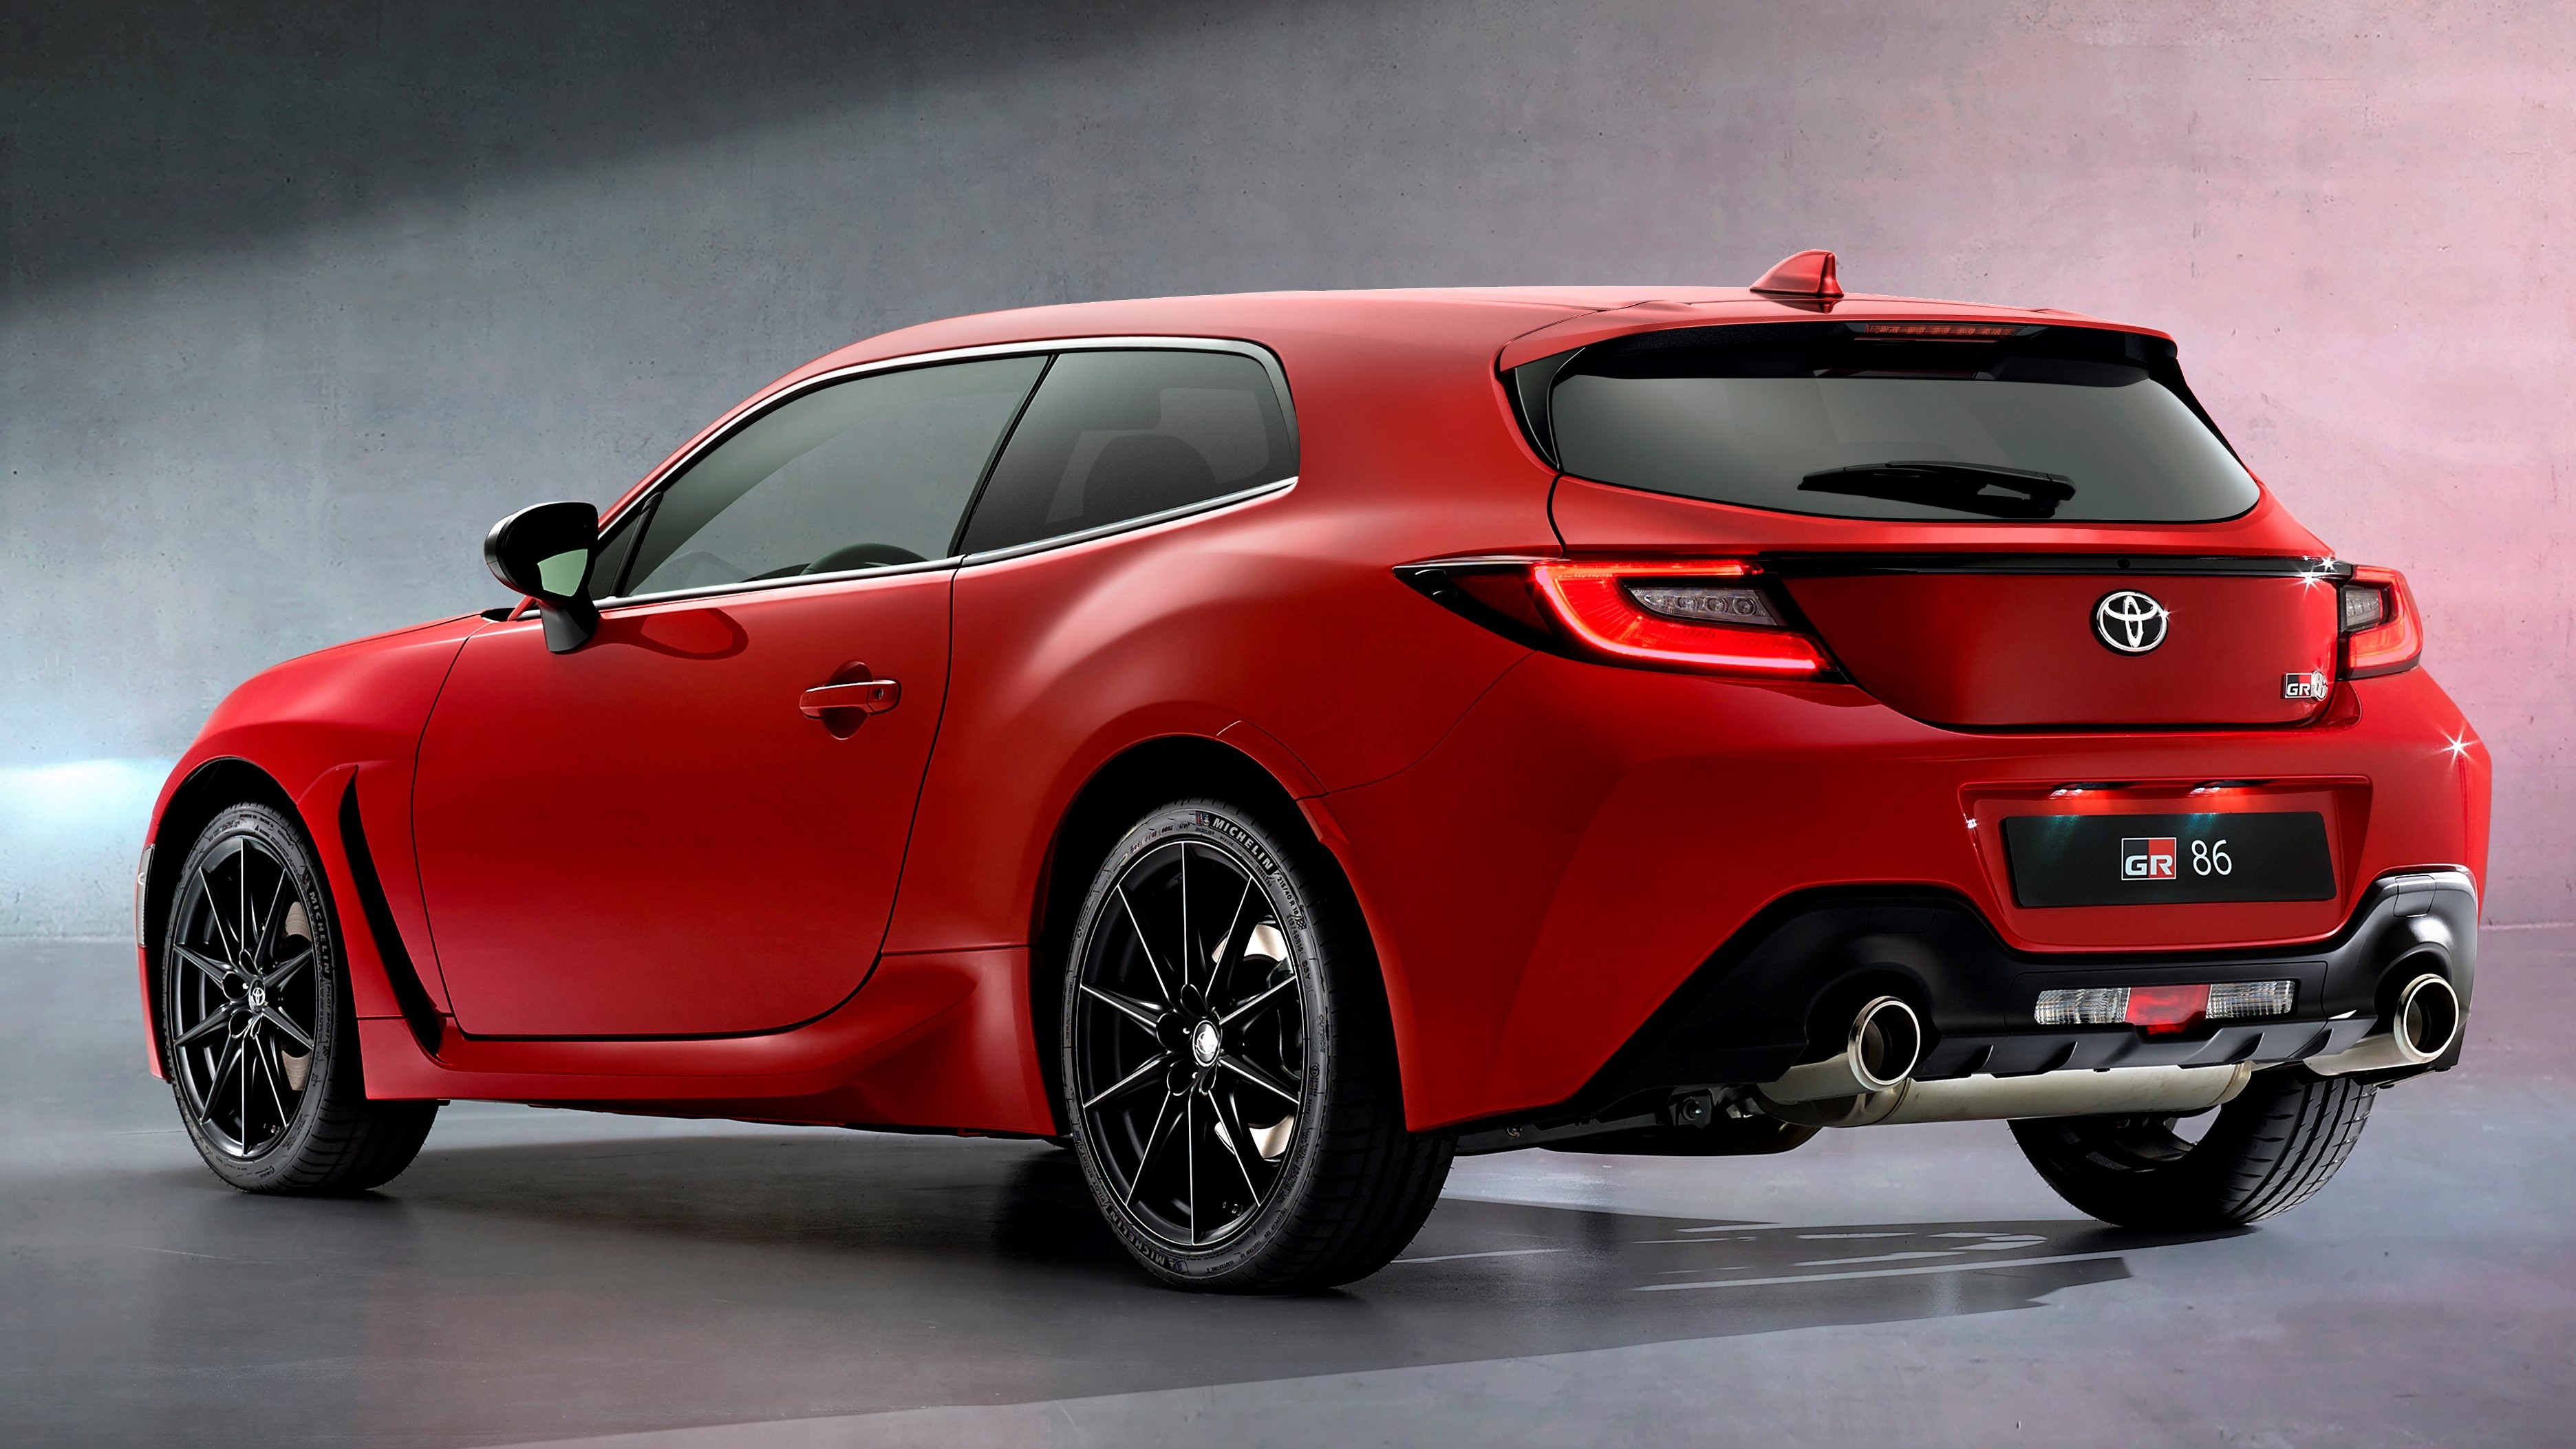 TopGear This is what a Toyota GR86 Shooting Brake could look like